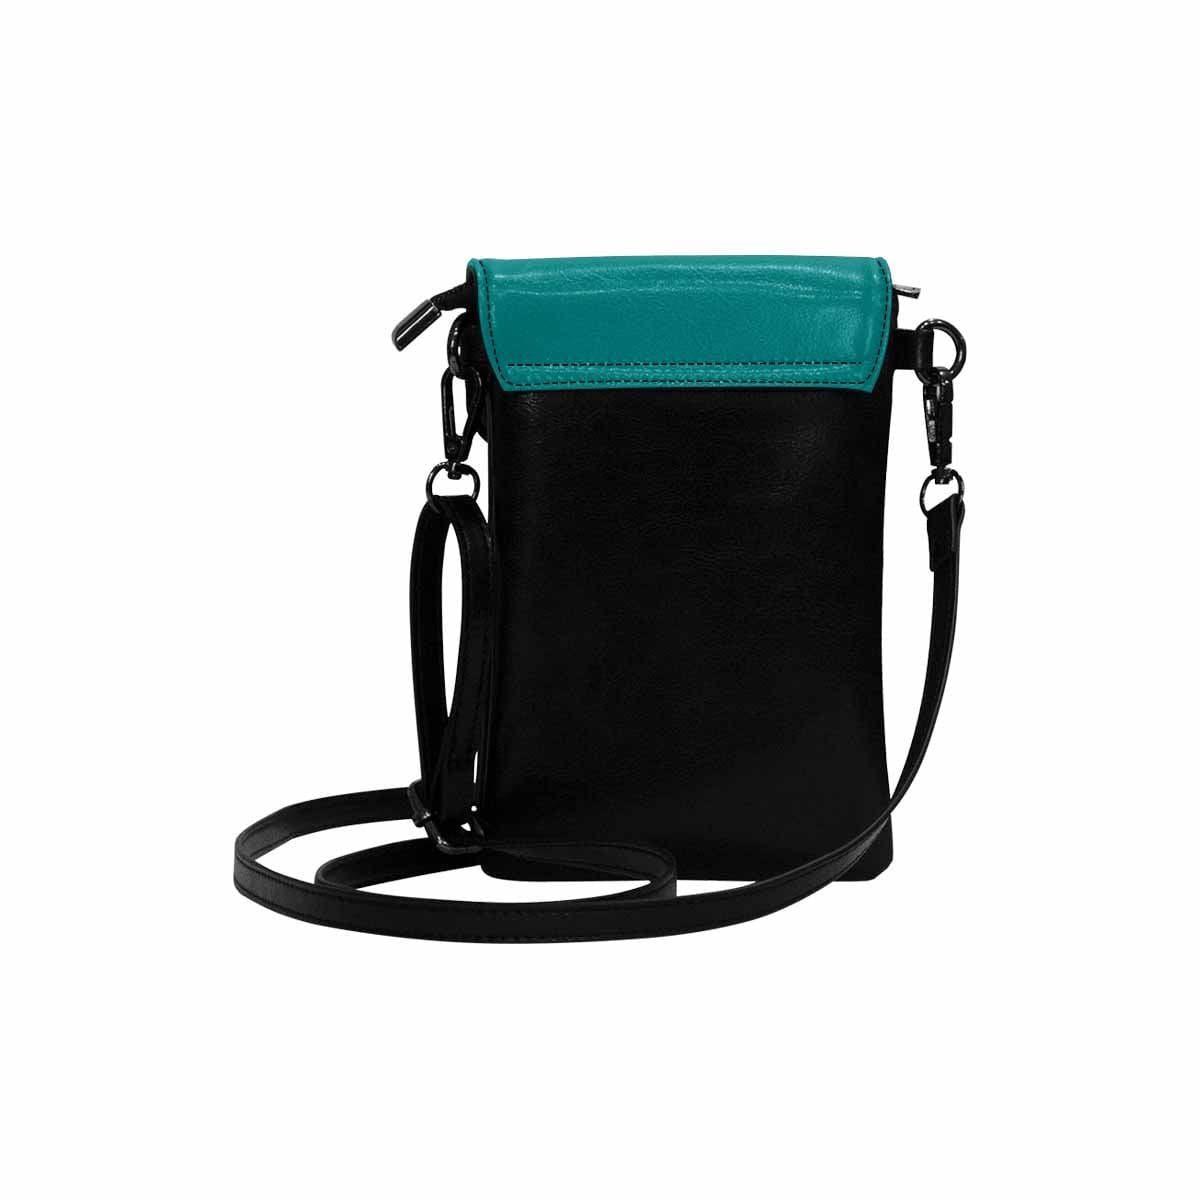 Womens Cell Phone Purse Dark Teal Green - Bags | Wallets | Phone Cases